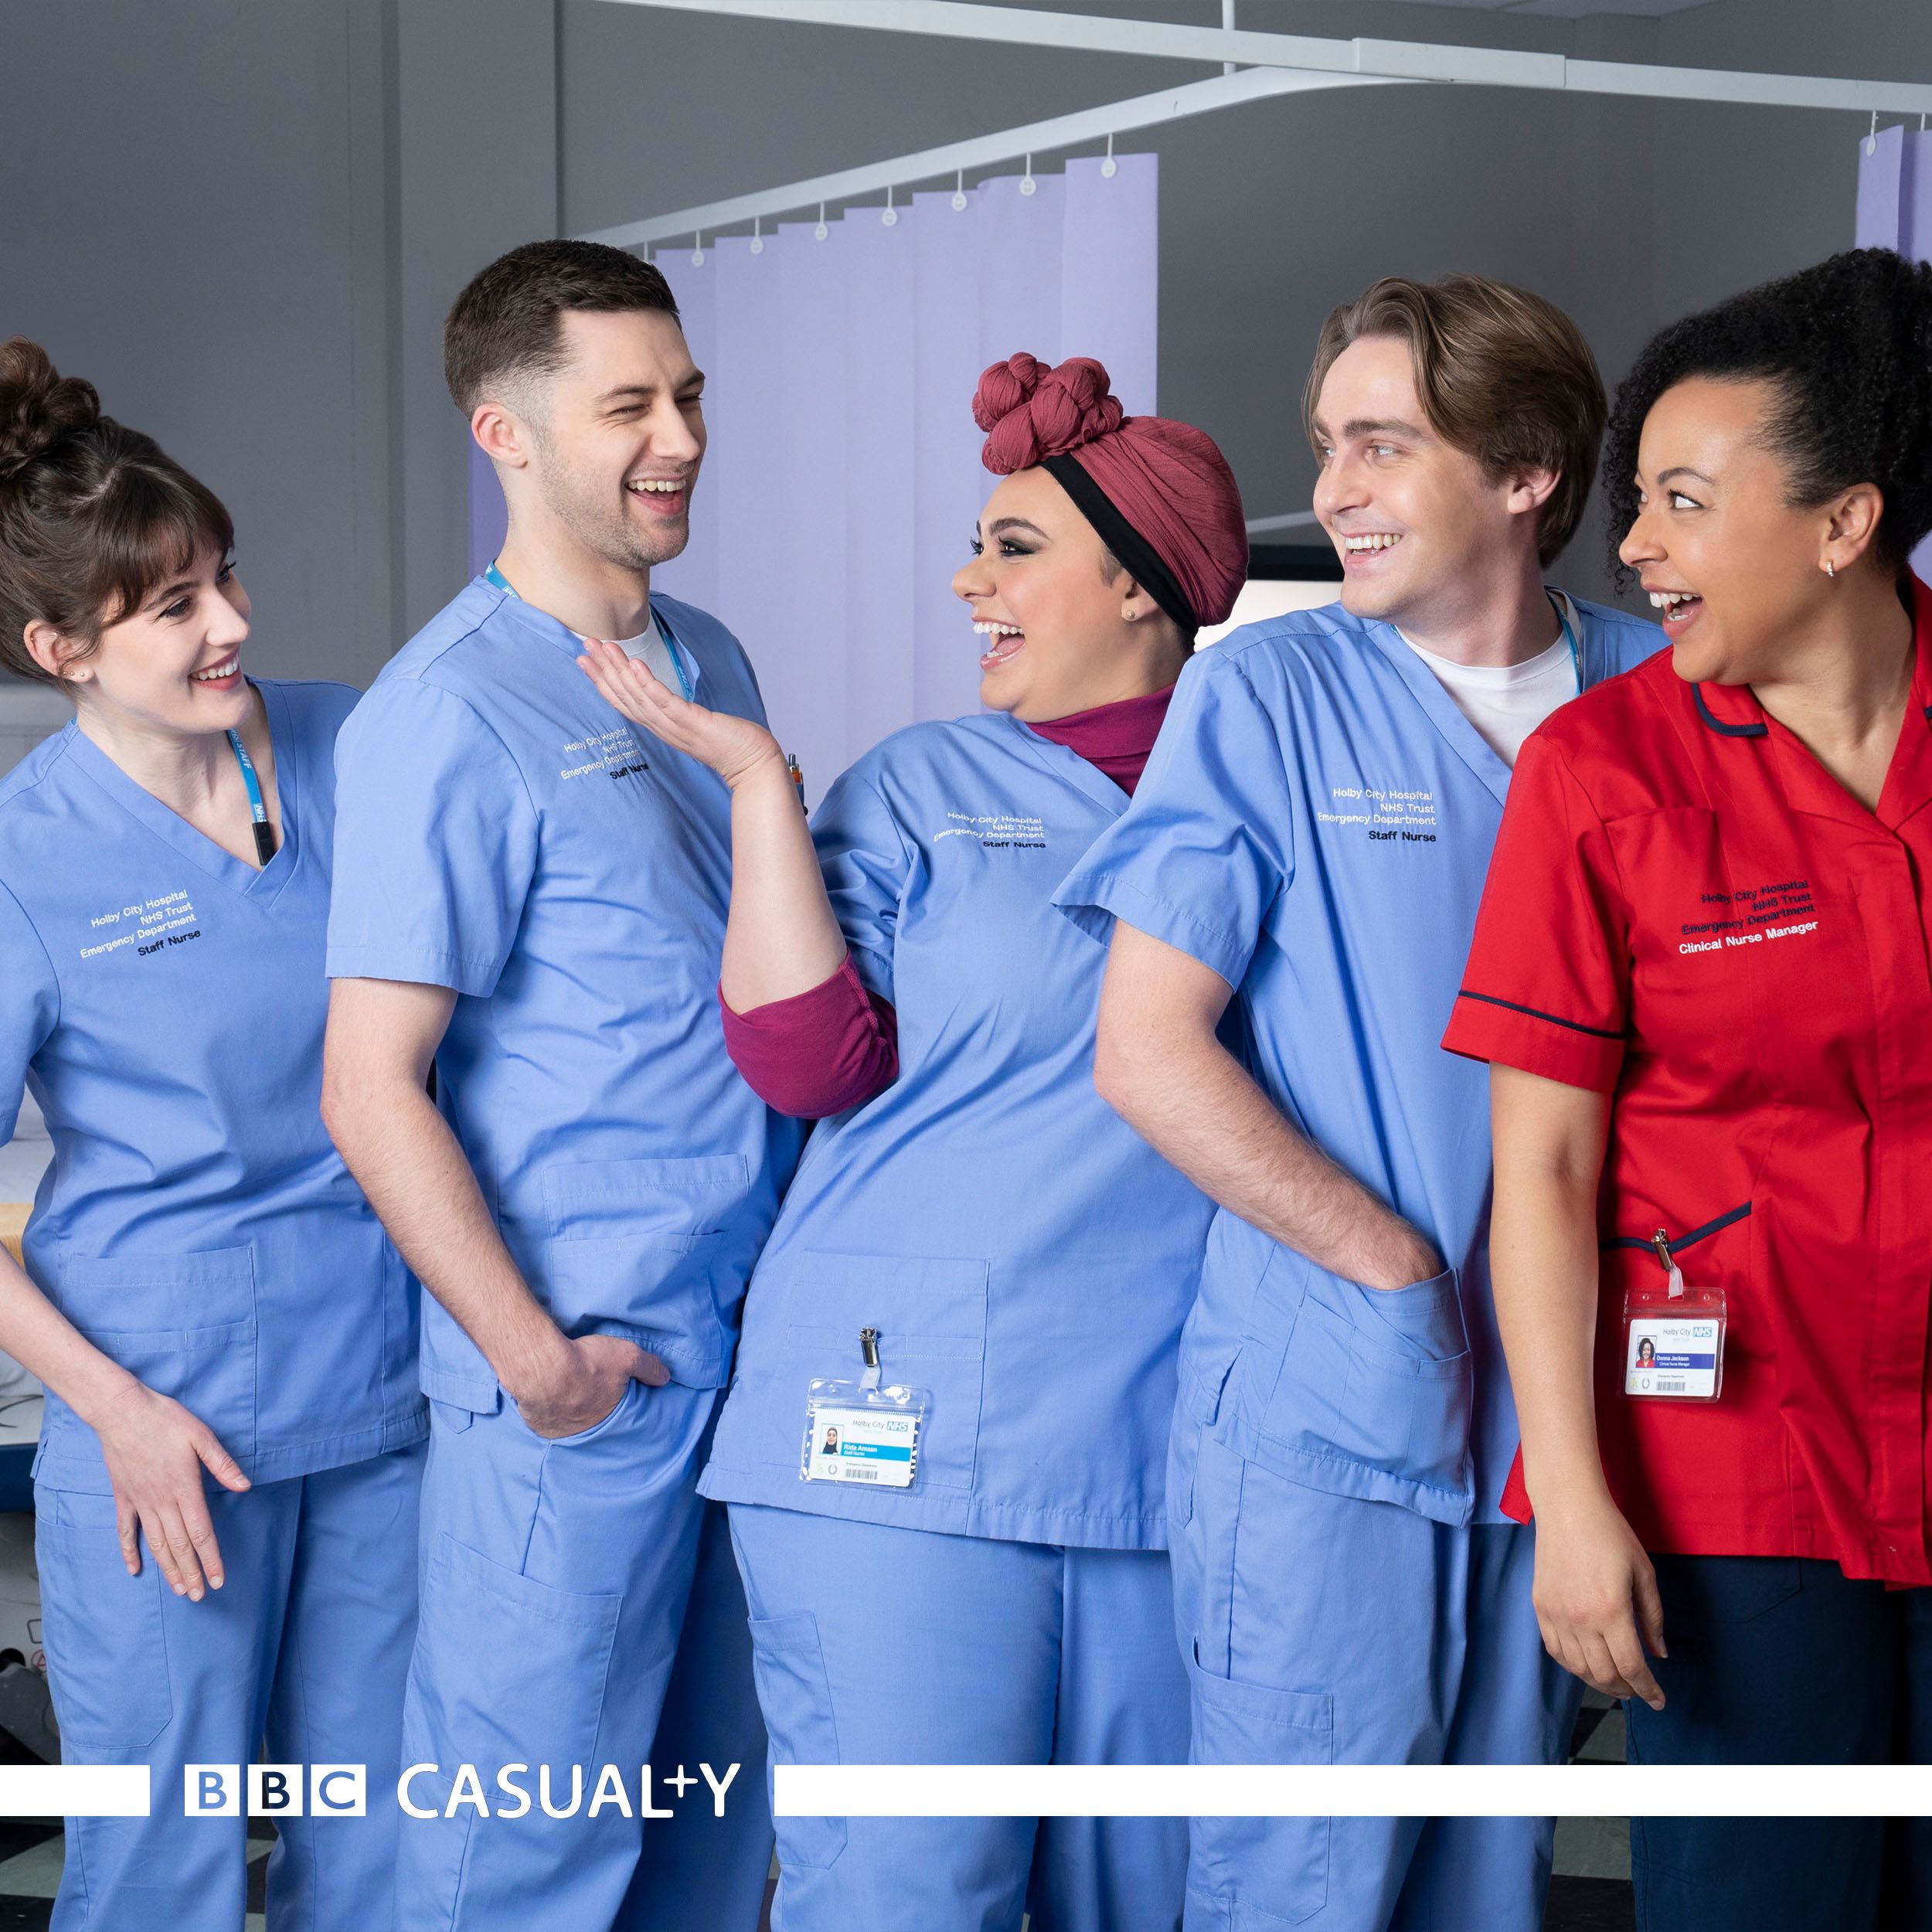 Casualty announces new cast members as Barney Walsh, Anna Chell, Sarah  Seggari and Eddie-Joe Robinson join as new nursing recruits - Media Centre